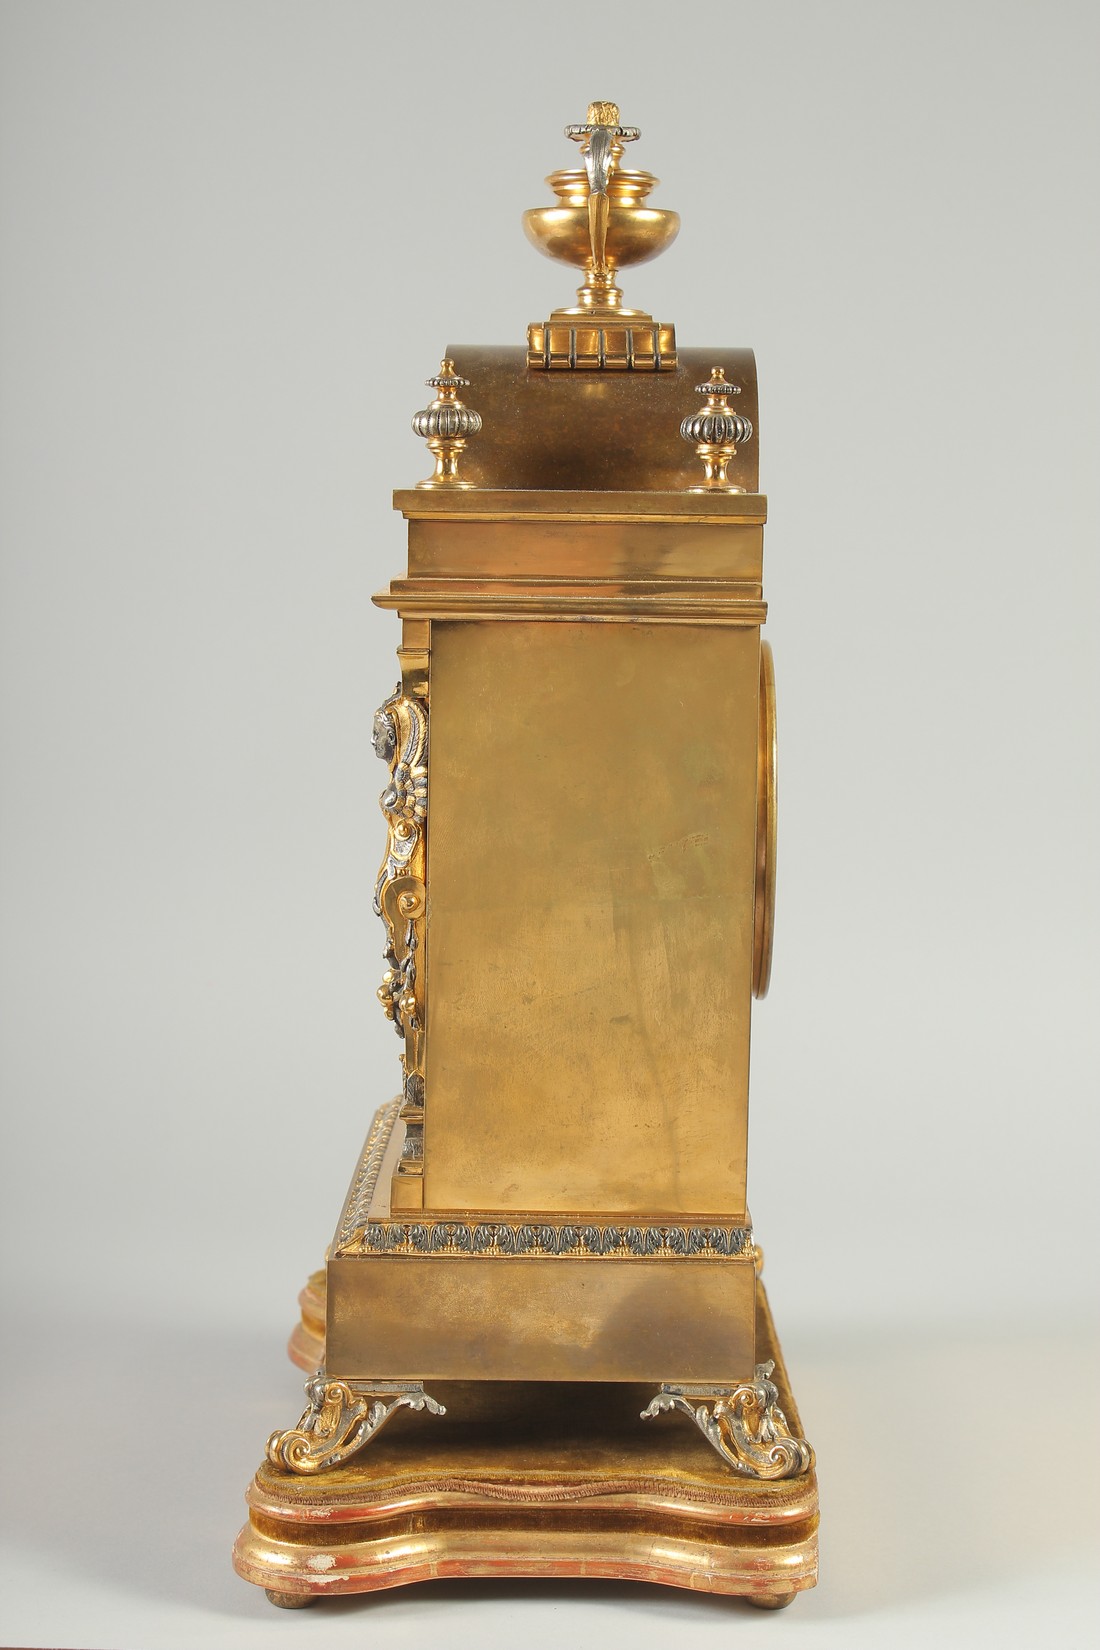 A GOOD 19TH CENTURY FRENCH ORMOLU MANTLE CLOCK possibly by ACHILLE BROCOT, with eight day movement - Image 2 of 6